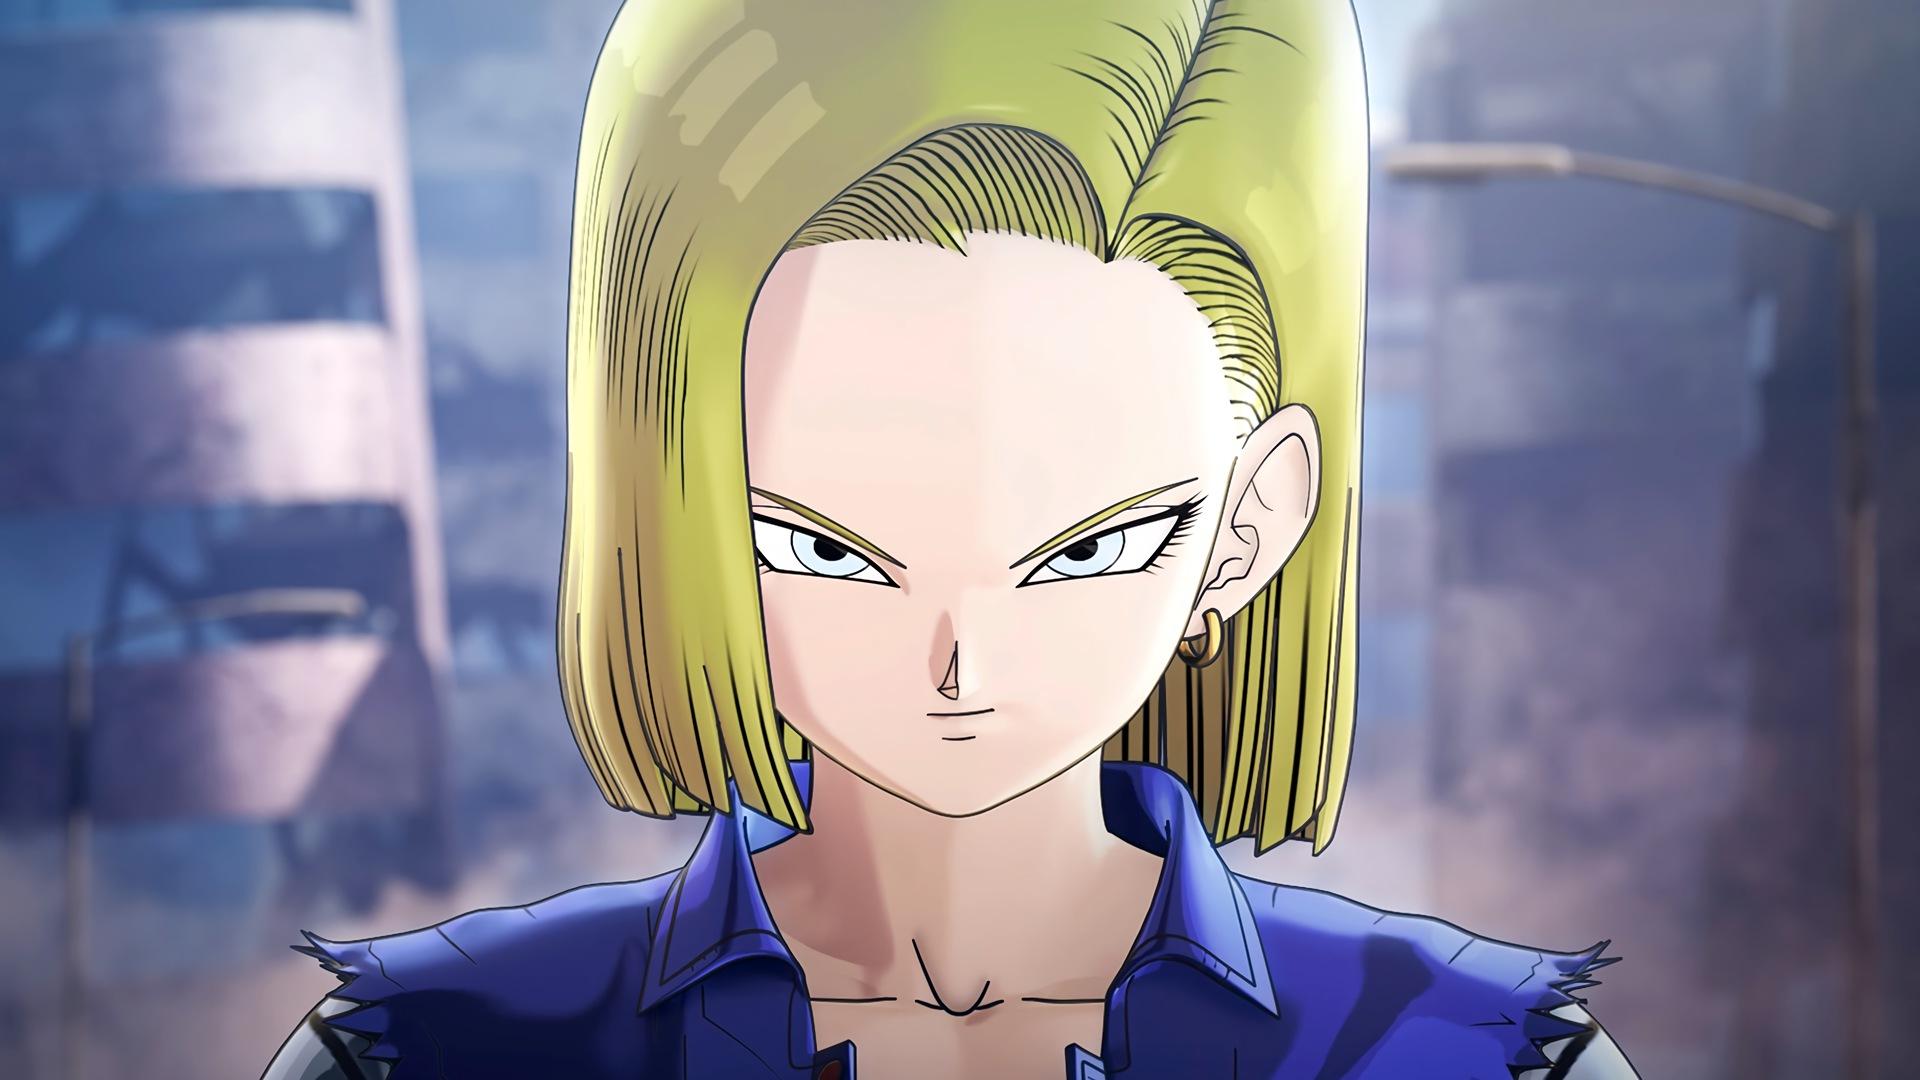 Android 17 Wallpaper. Android